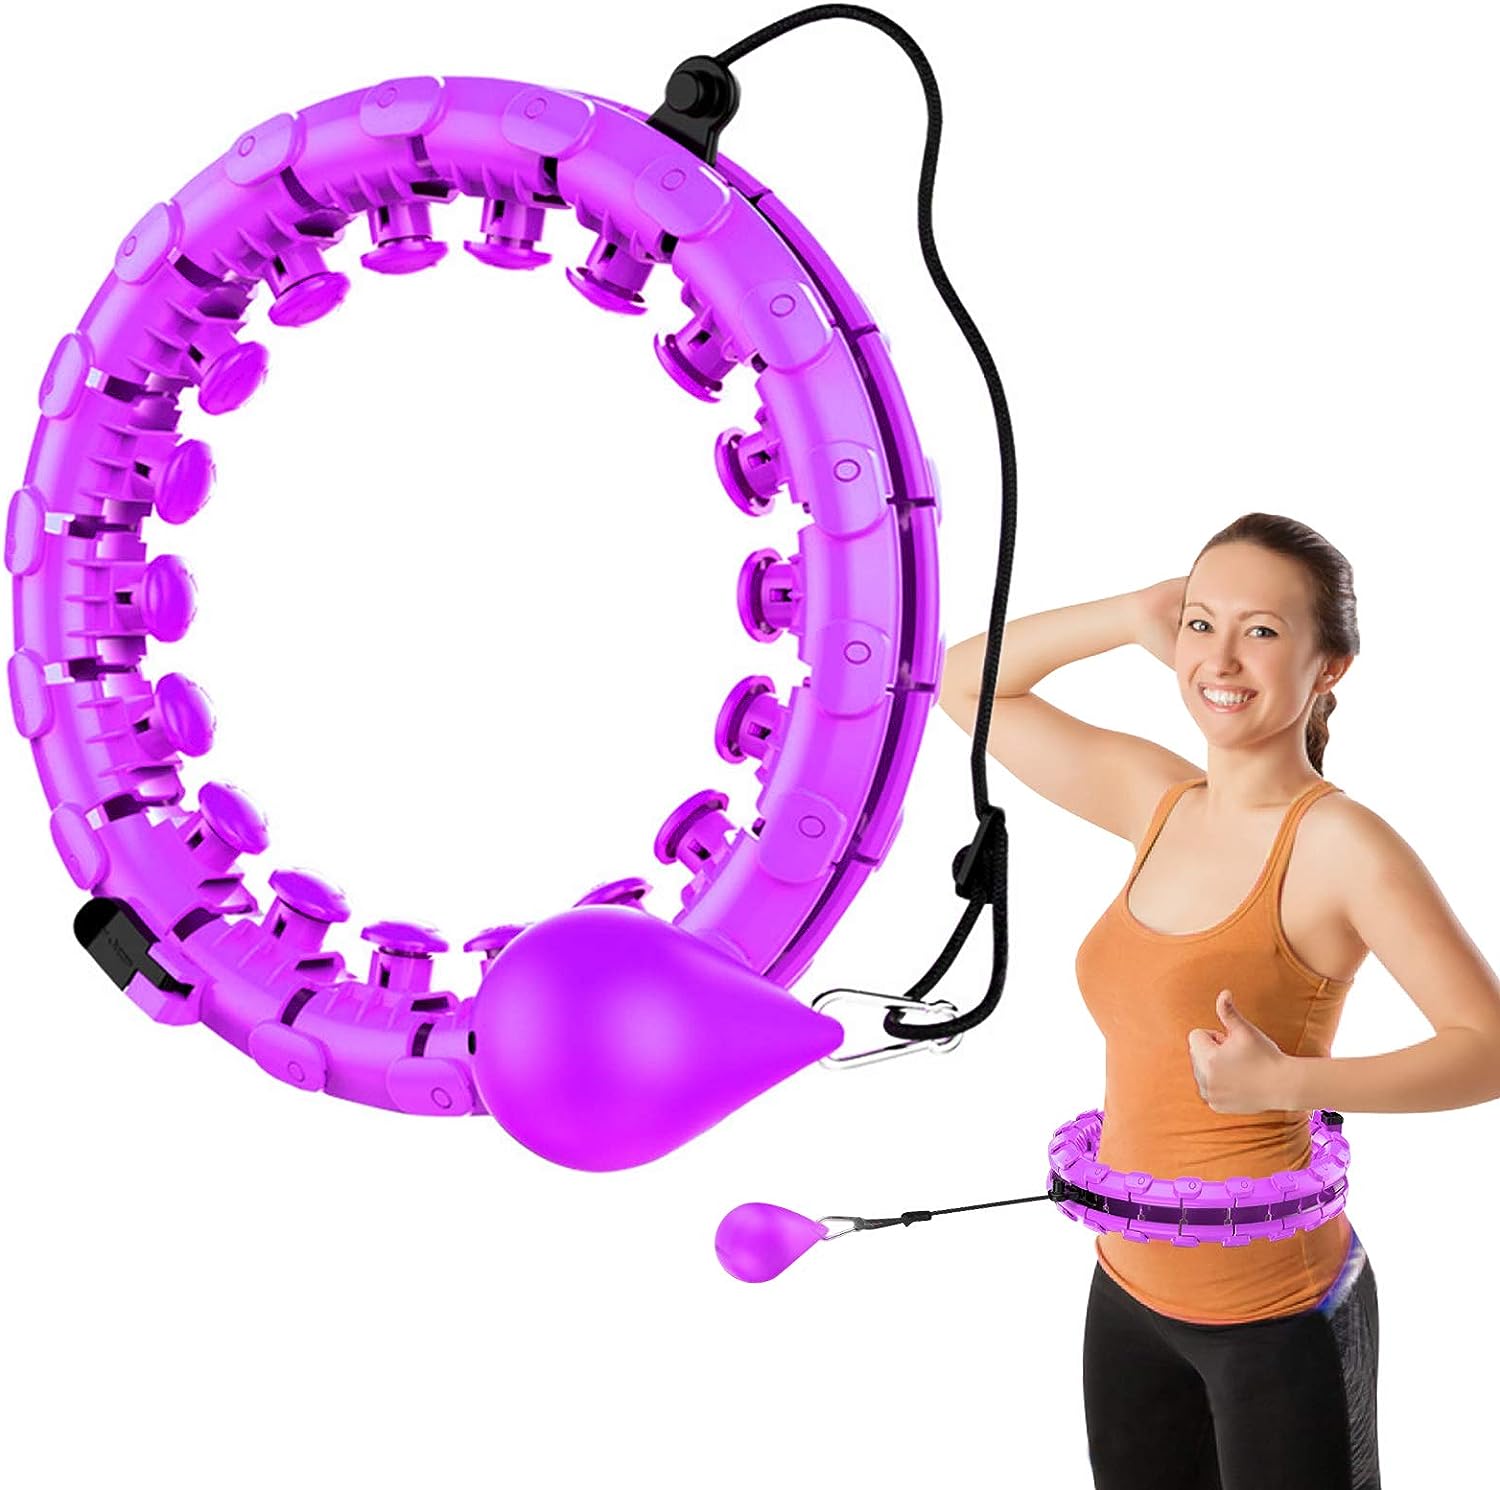 Smart Weighted Fitness Hoop Abdomen Exercise Equipment, 2 in 1 Abdomen Fitness and Massage No Fall Hula Ring with 24 Detachable Knots Adjustable Weight Auto-Spinning Ball for Adults and Kids